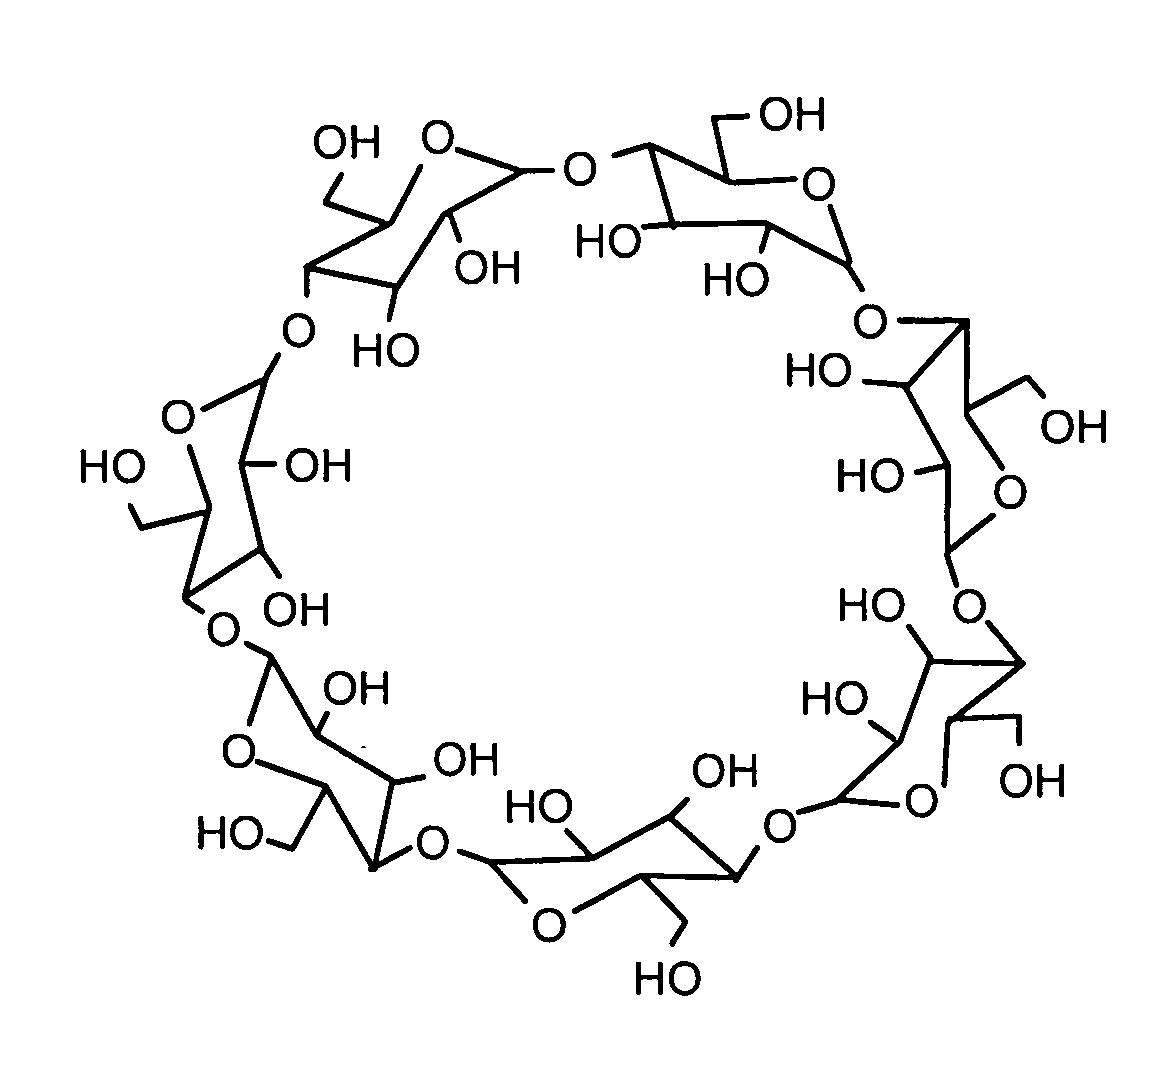 Entrapped Beta-Cyclodextrin Polymer and a Method of Preparing the Same